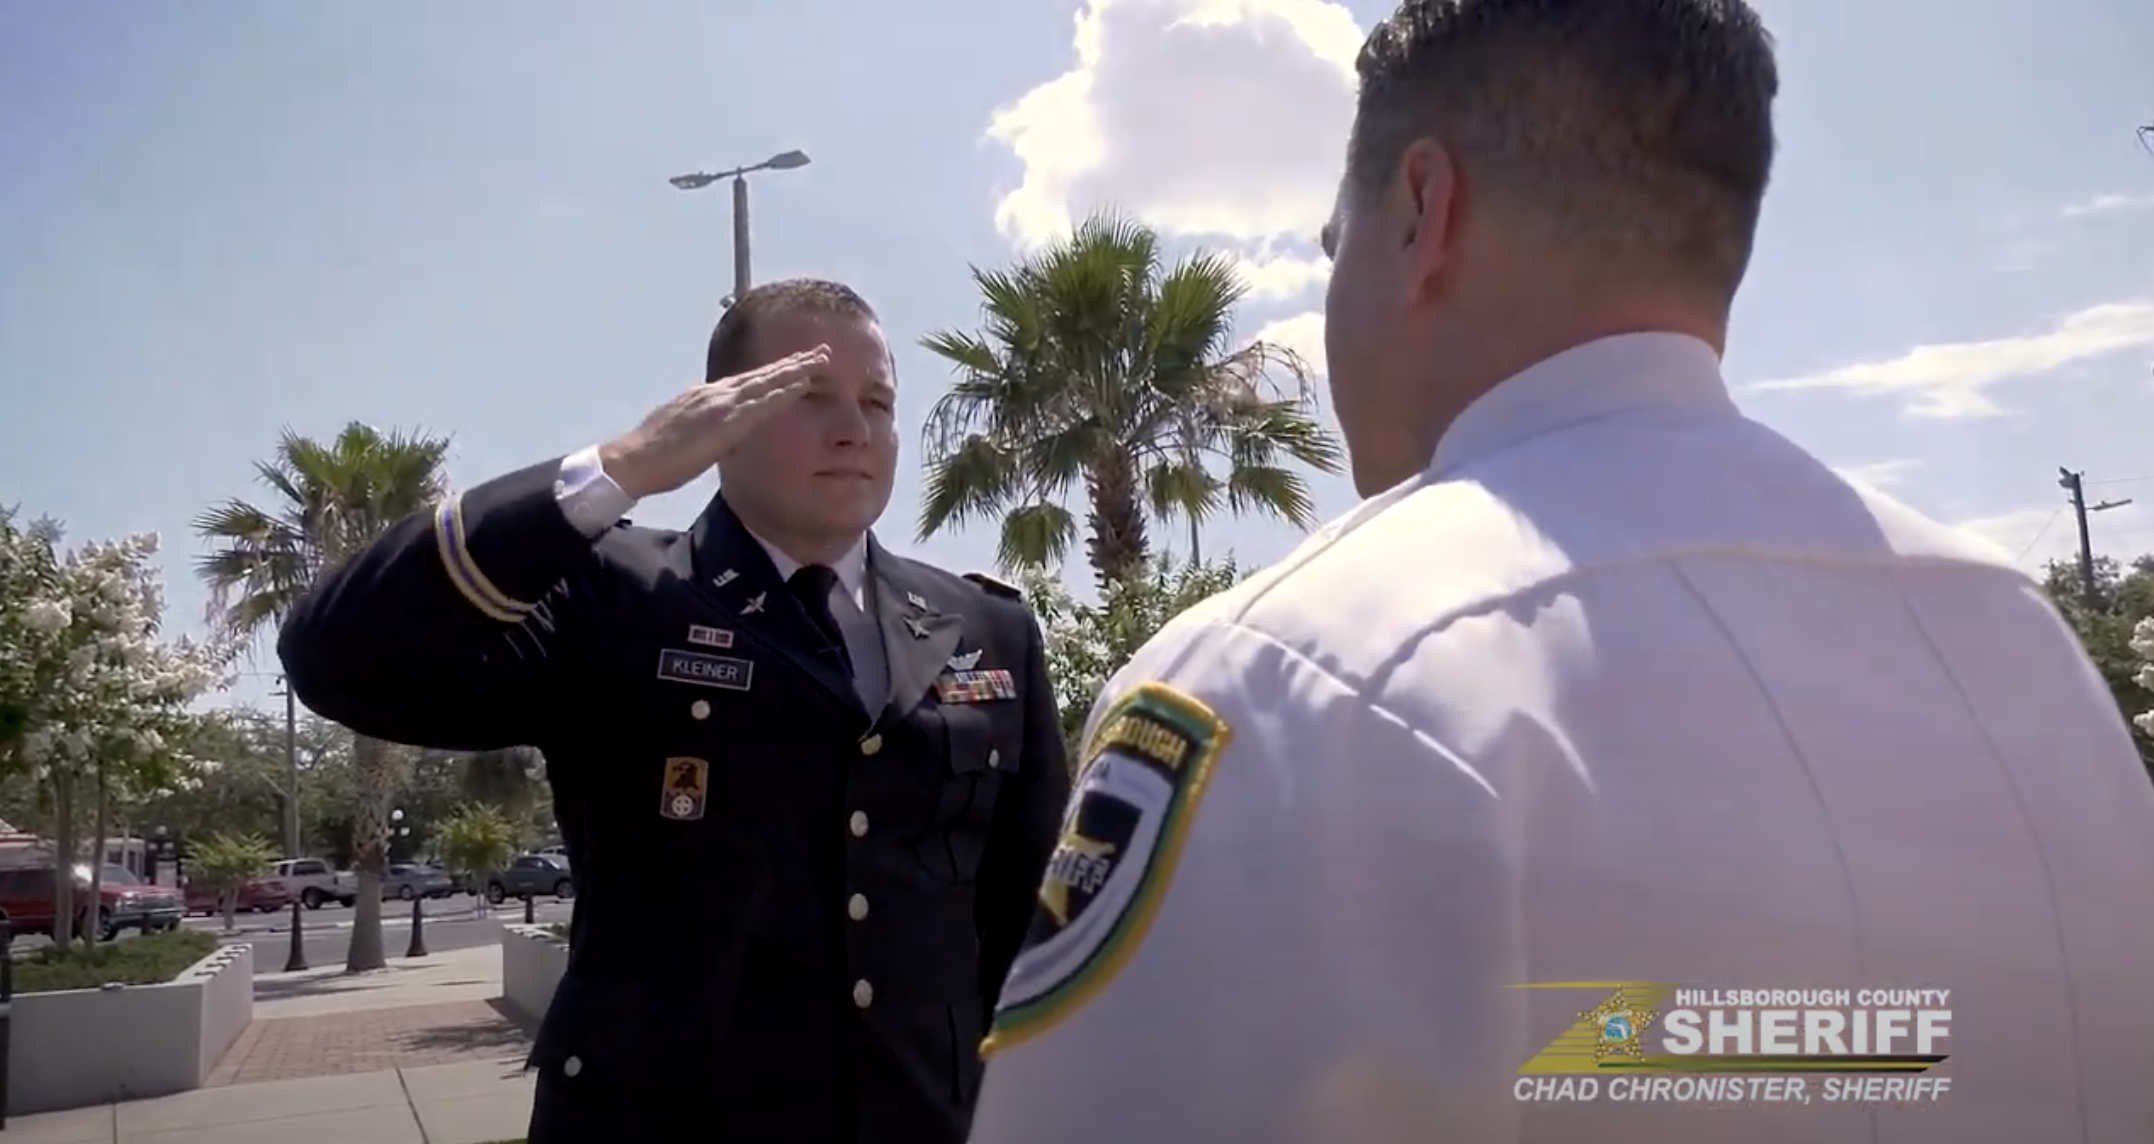 Memorial Day Tribute: Deputy presents U.S. flag to Sheriff Chad Chronister